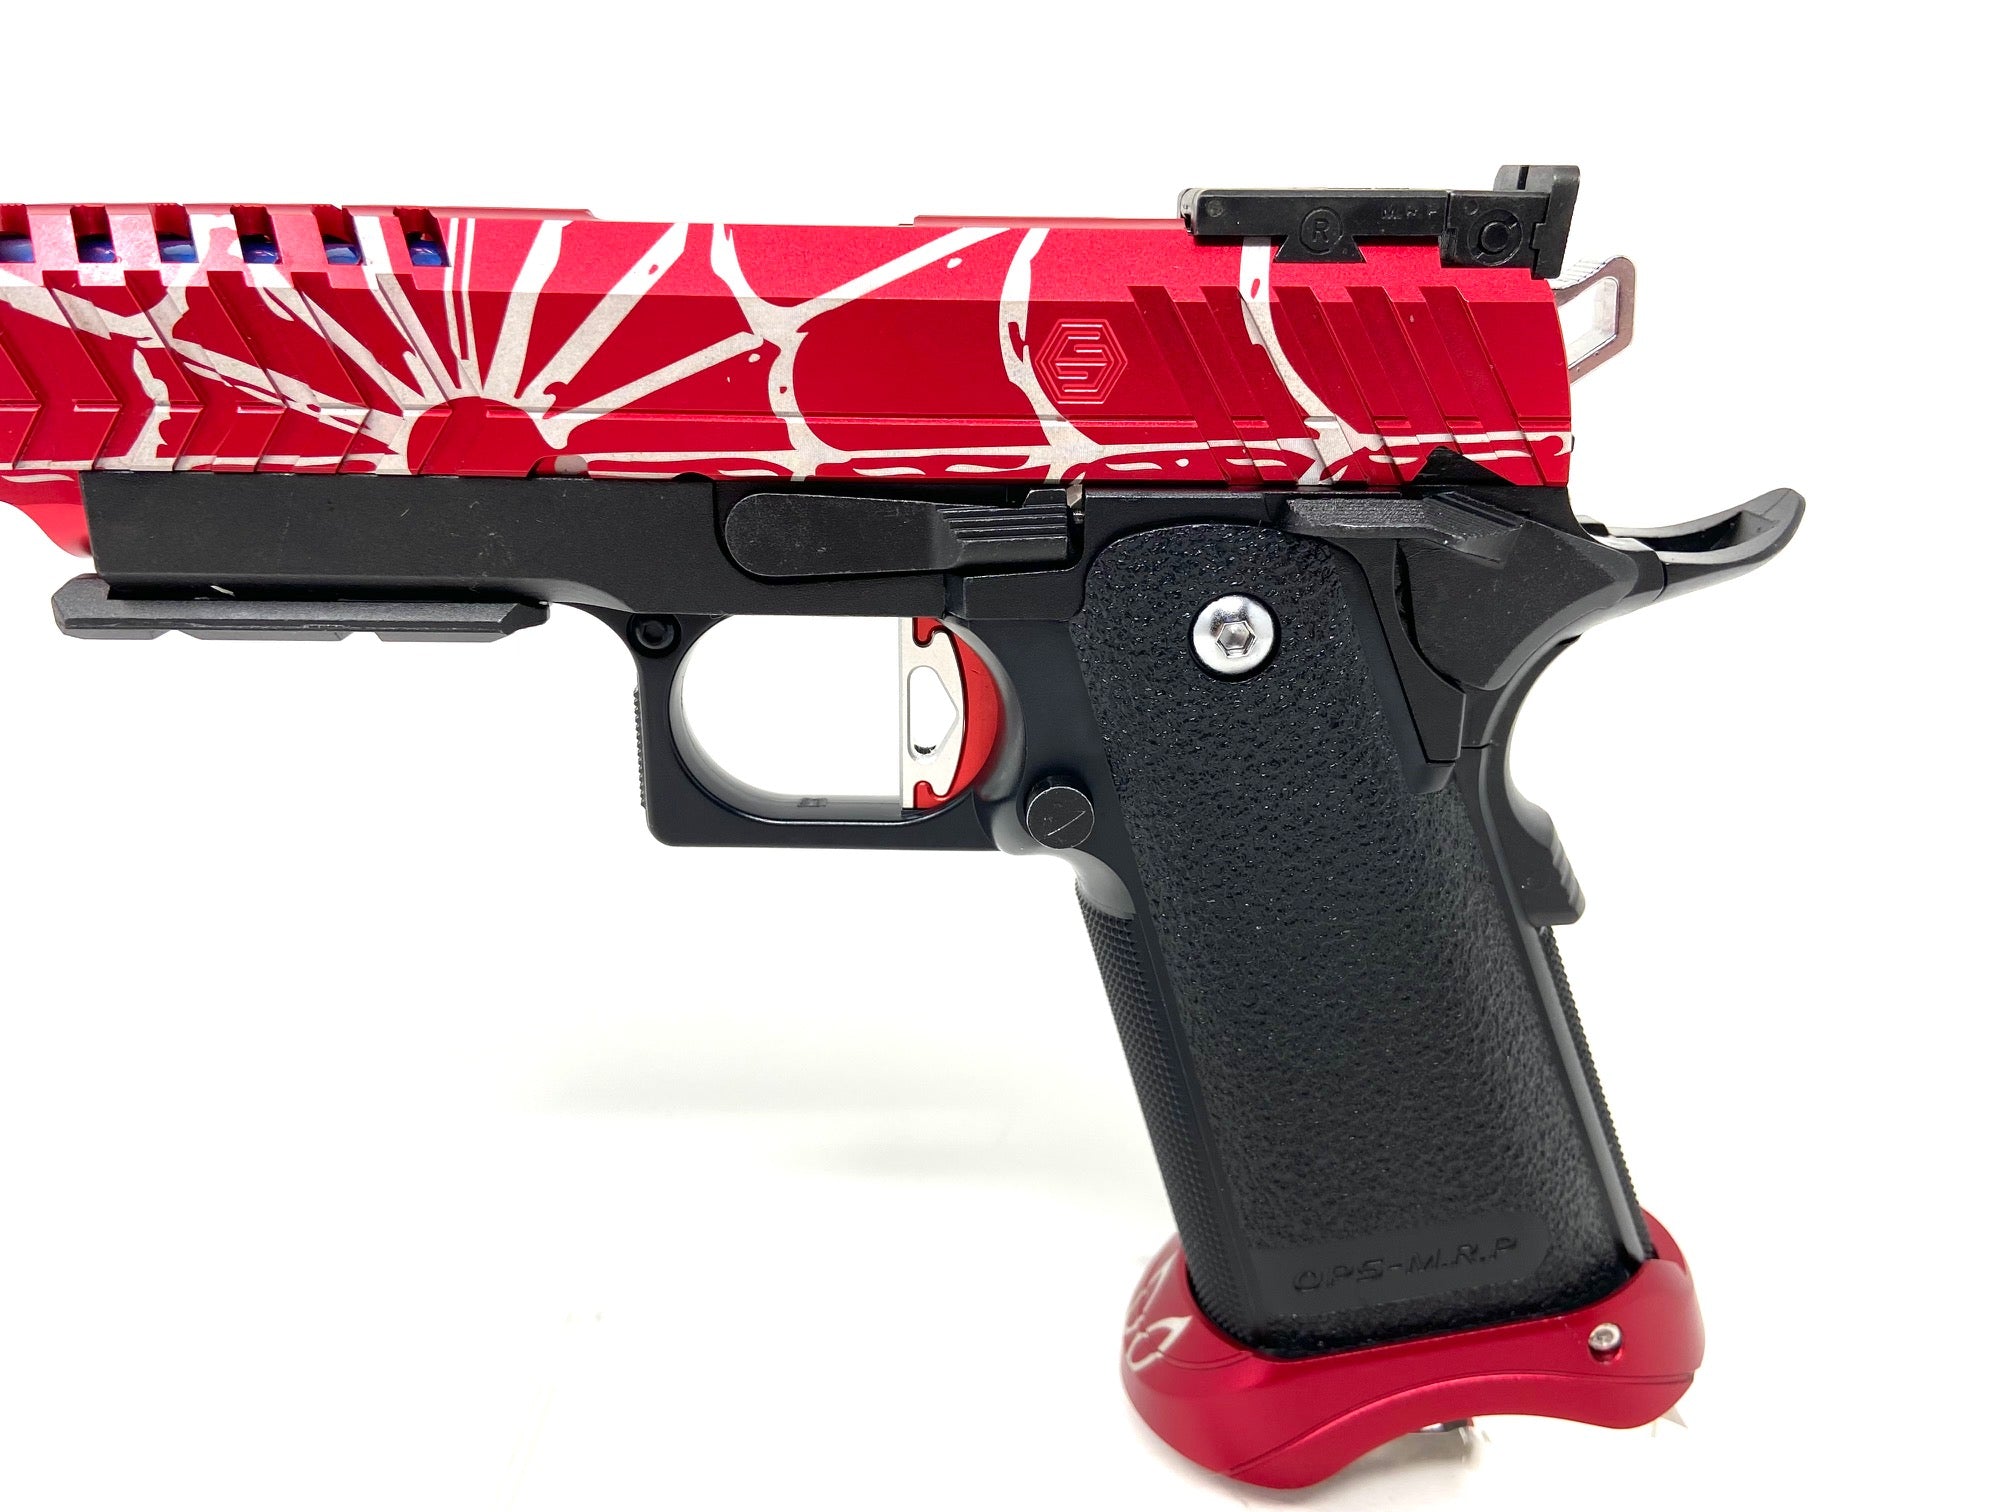 Spider Man 2.0 Includes:  Tokyo Marui 5.1 base  Spider Man Laser Engraved Airsoft Masterpiece Edge Max Slide  Spider Man Laser Engraved LA Capa Magwell Red  CowCow NP1 Nozzle Spring  AIP 140% Nozzle Spring  LA Capa Threaded outer barrel  CowCow Red/Silver two piece trigger  CowCow buffer kit